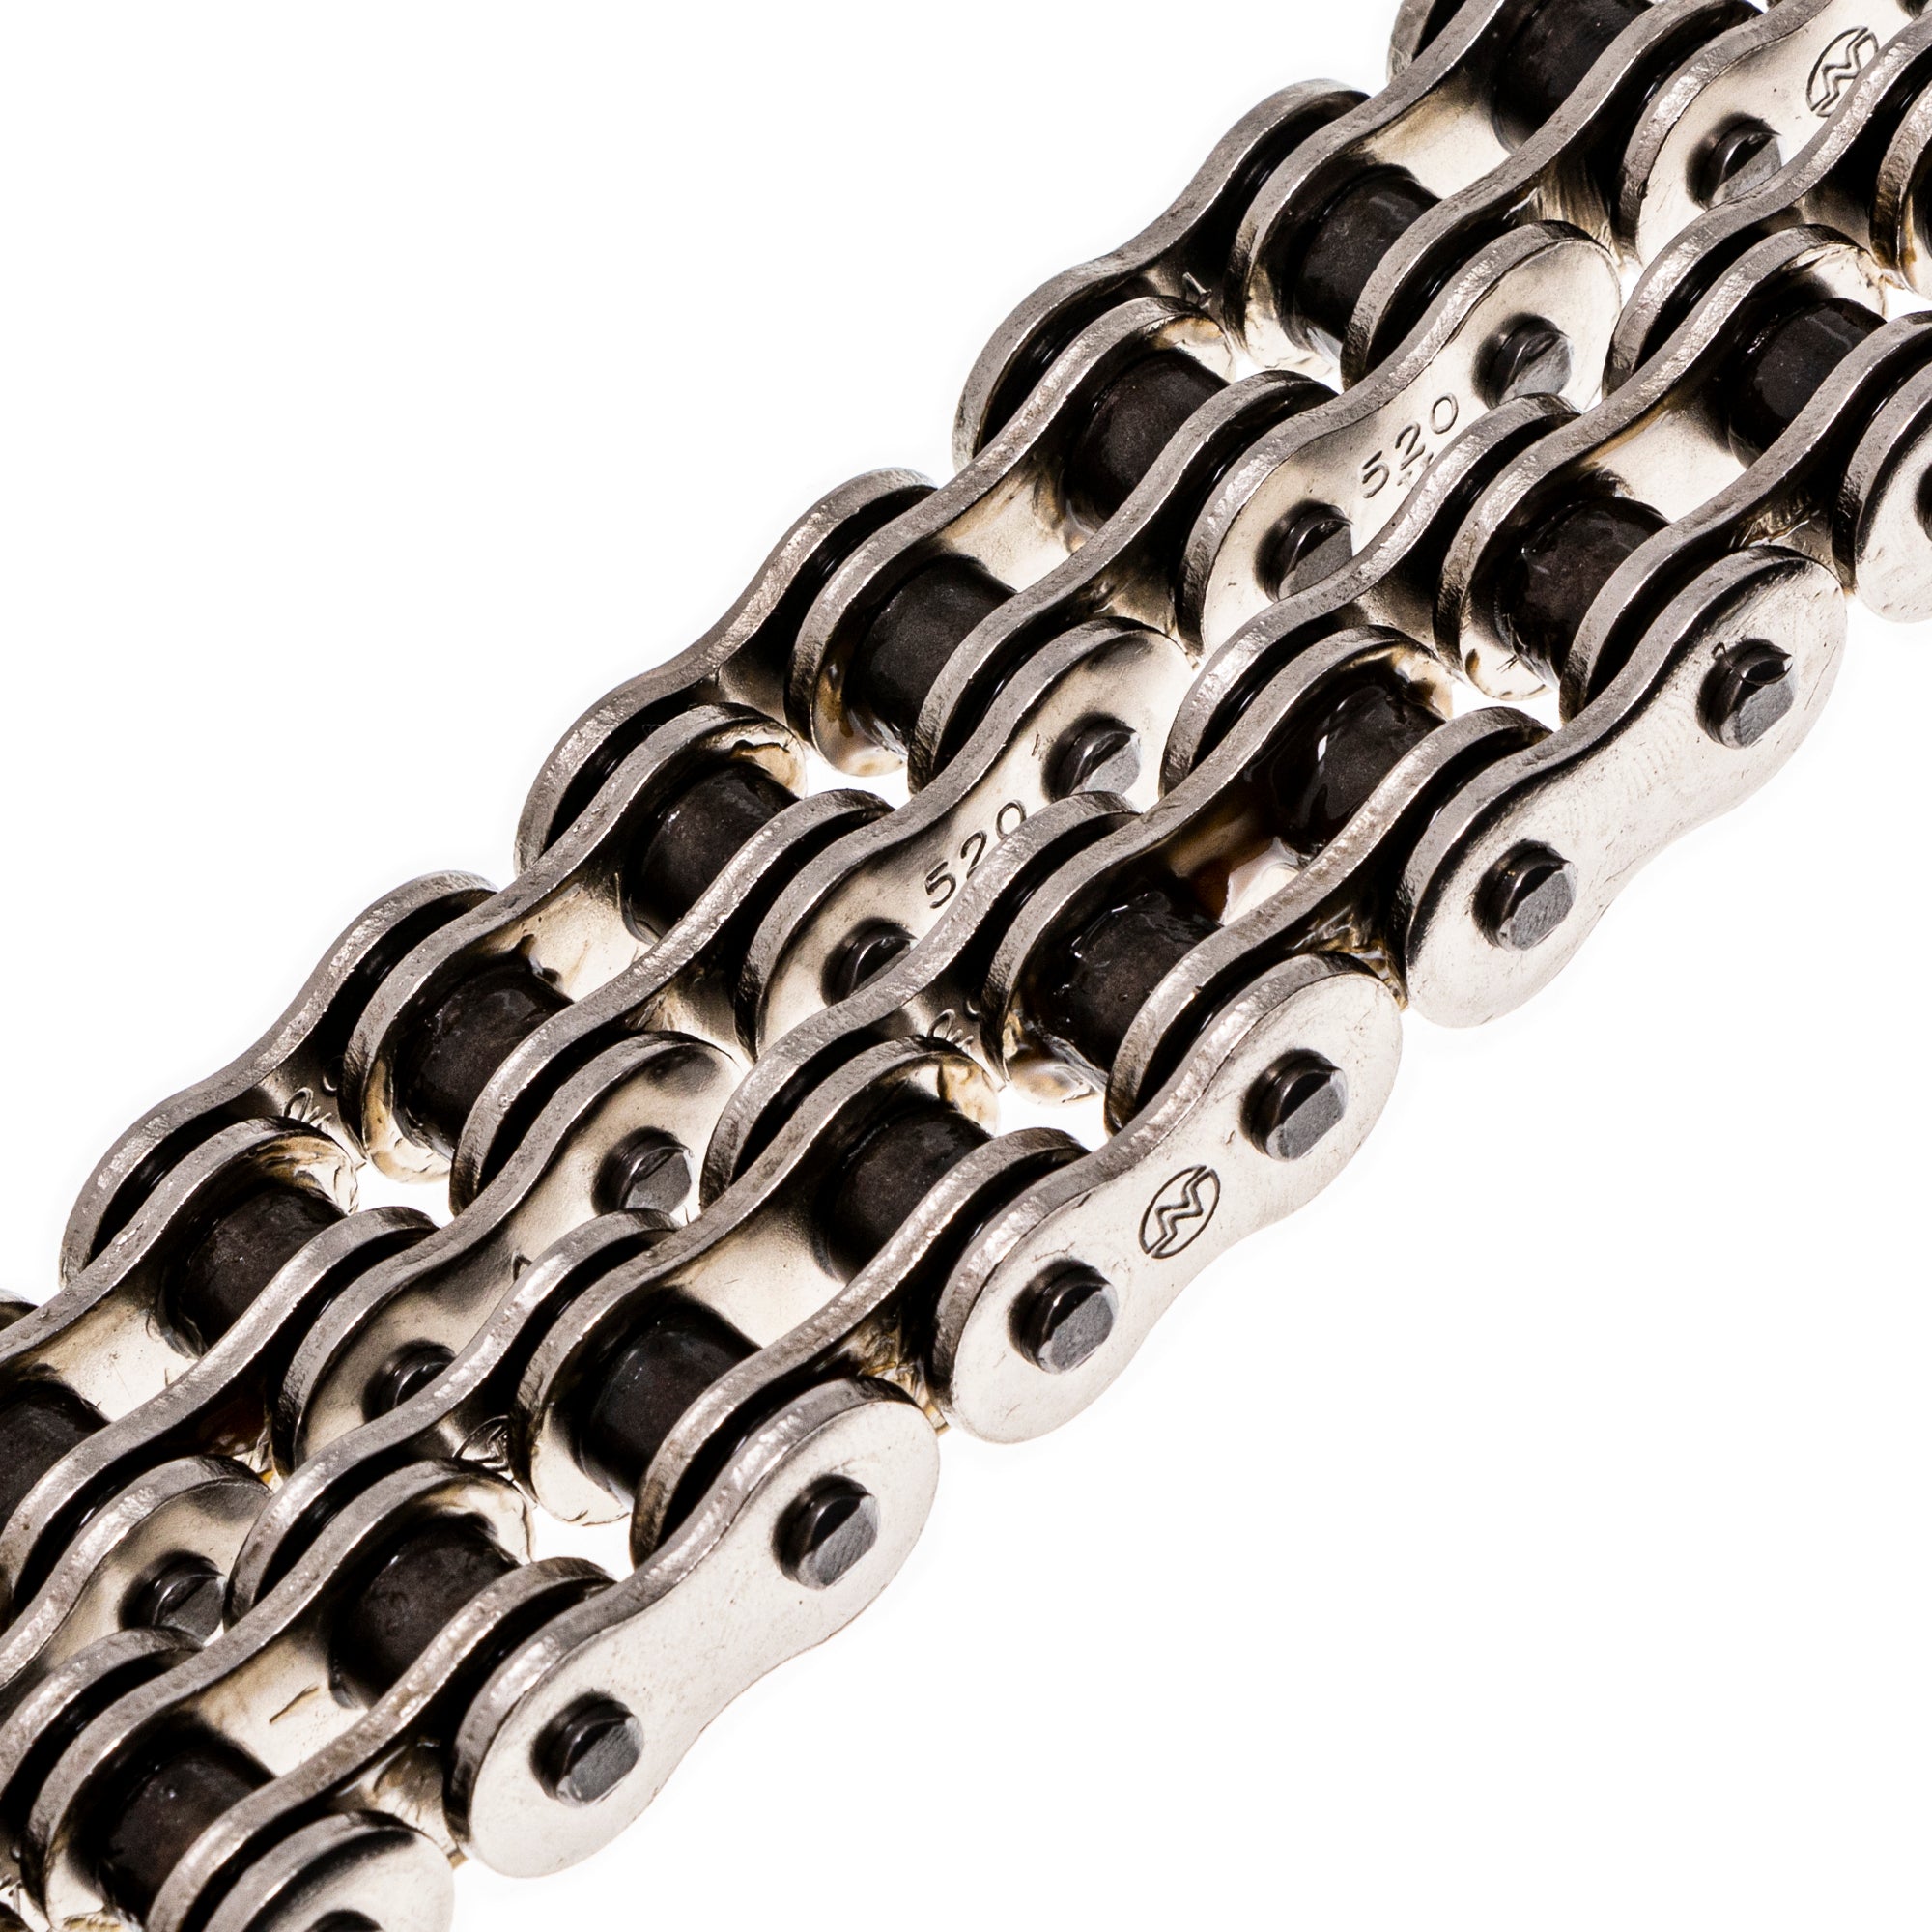 Drive Chain 128 Standard Non O-Ring w/ Master Link for zOTHER 5237 NICHE 519-CDC2348H